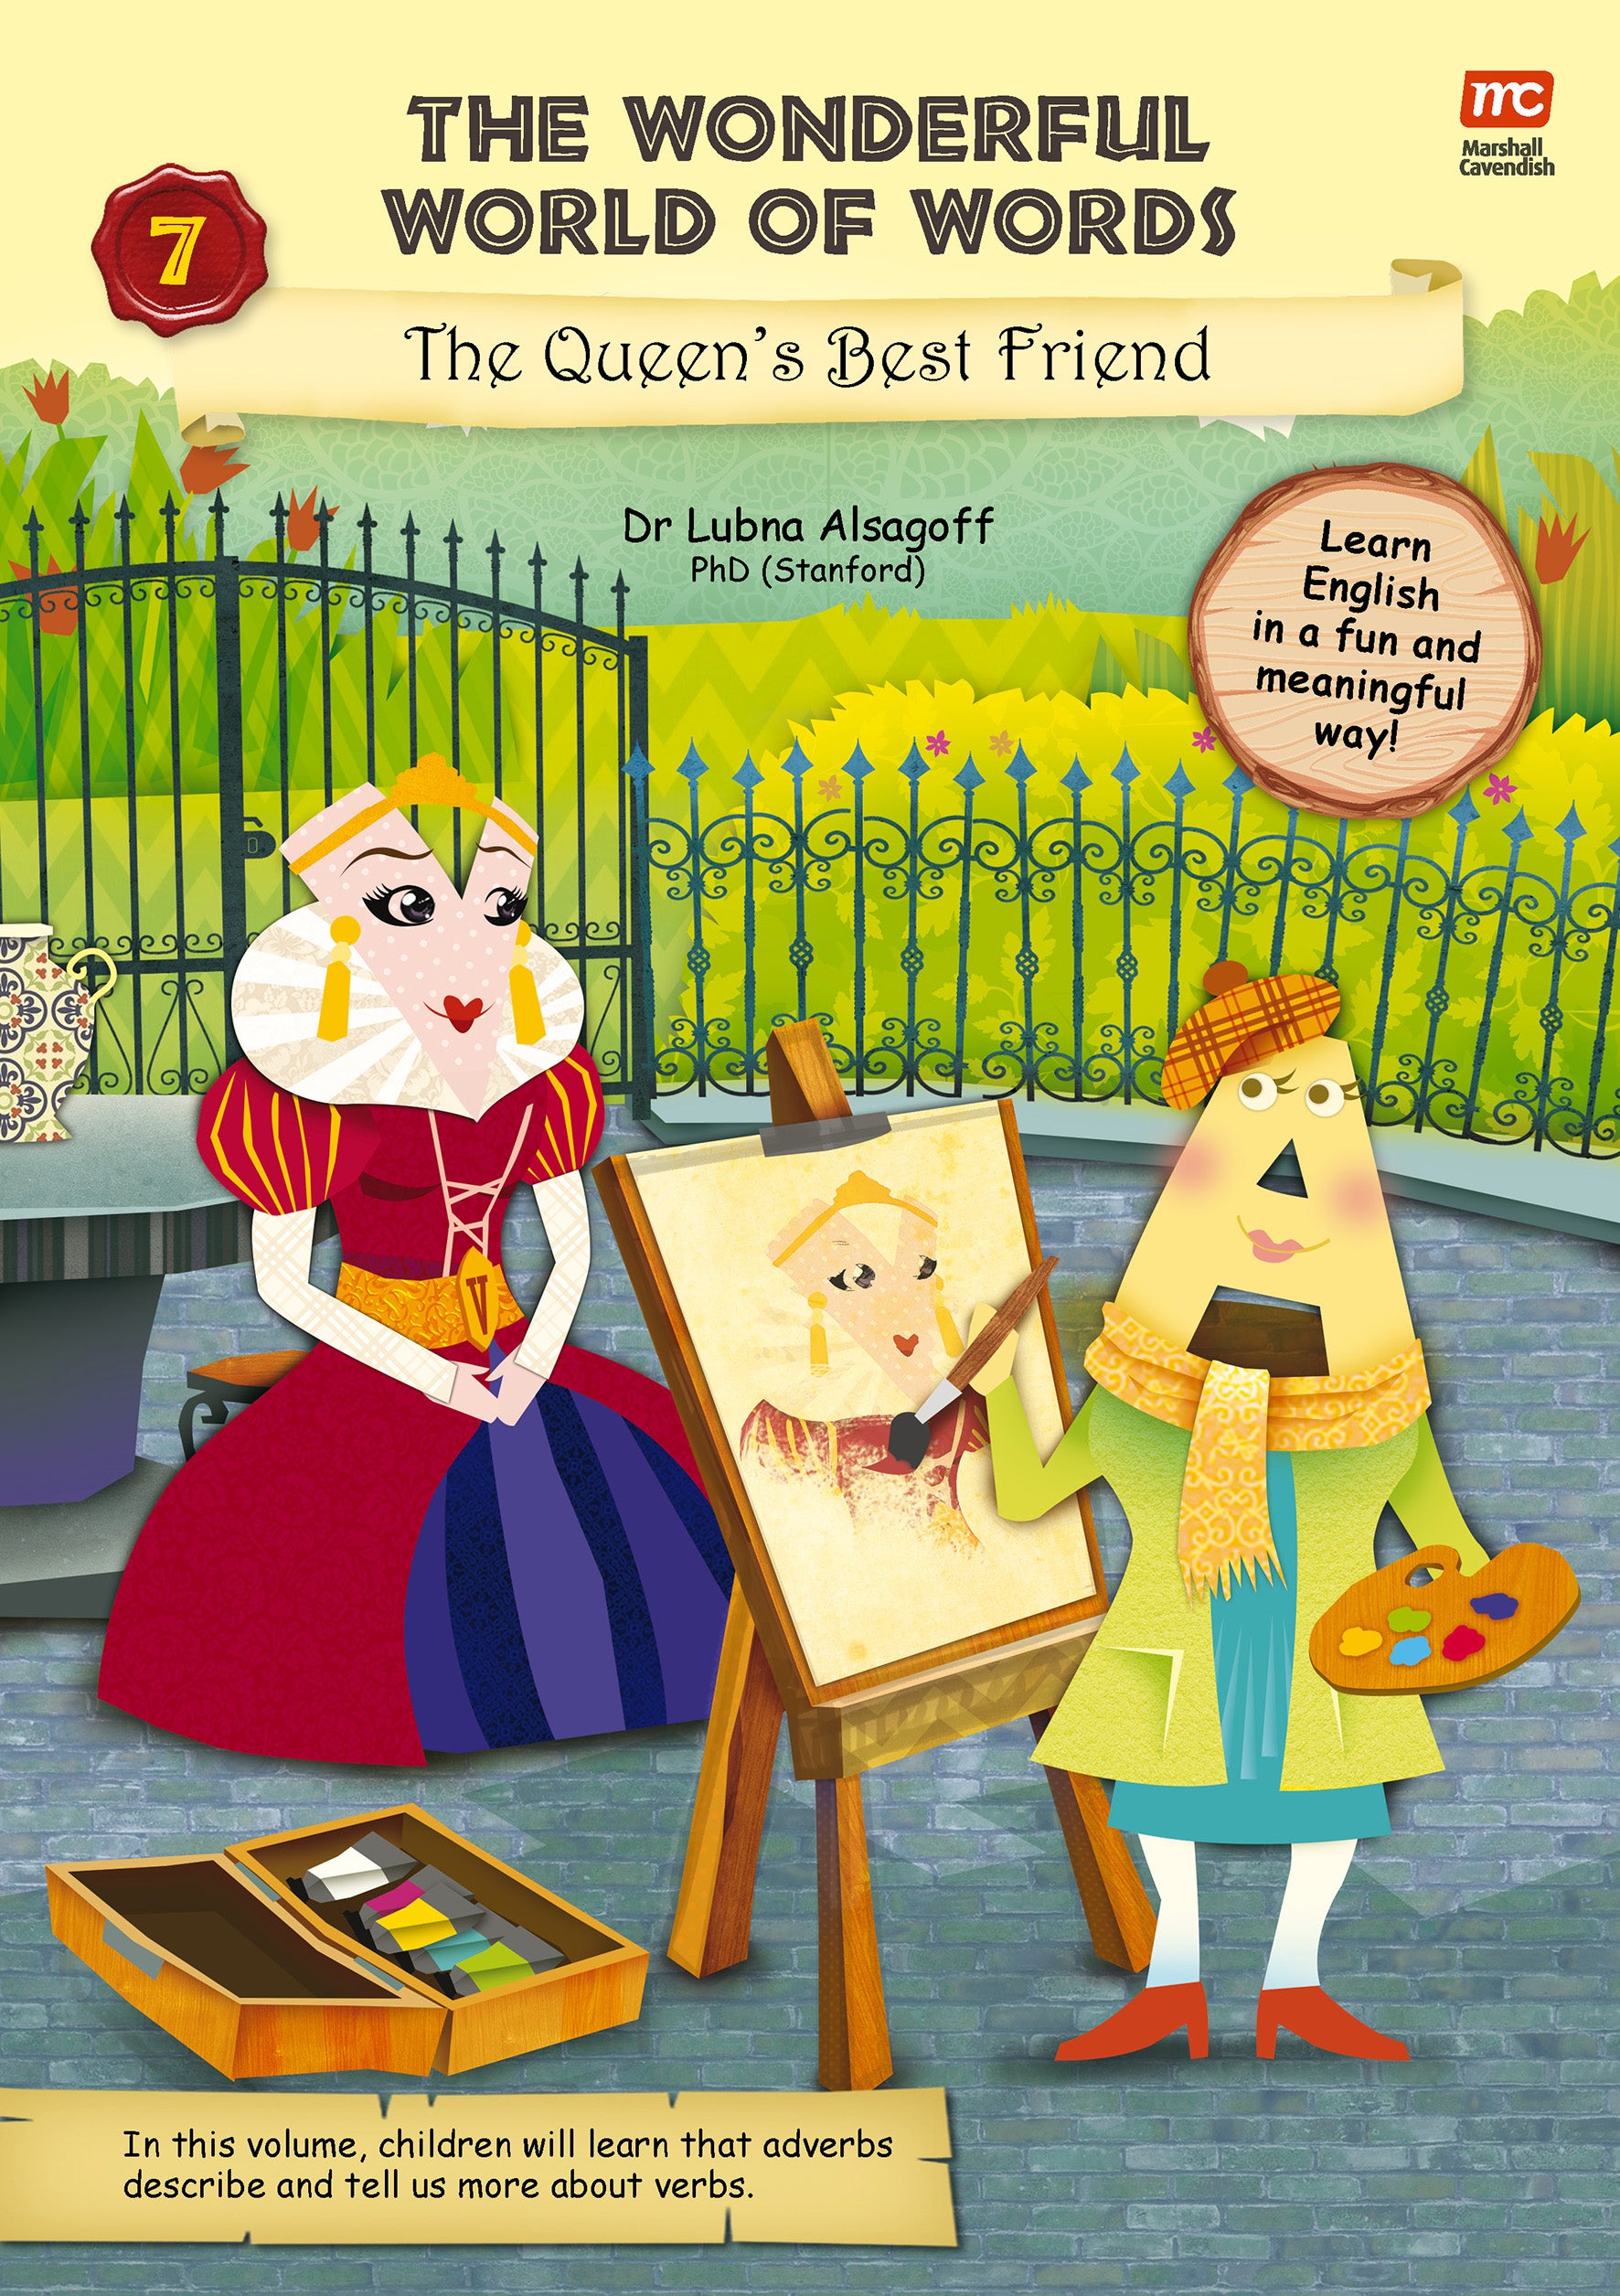 The Wonderful World of Words: The Queen's Best Friend (Vol. 7)